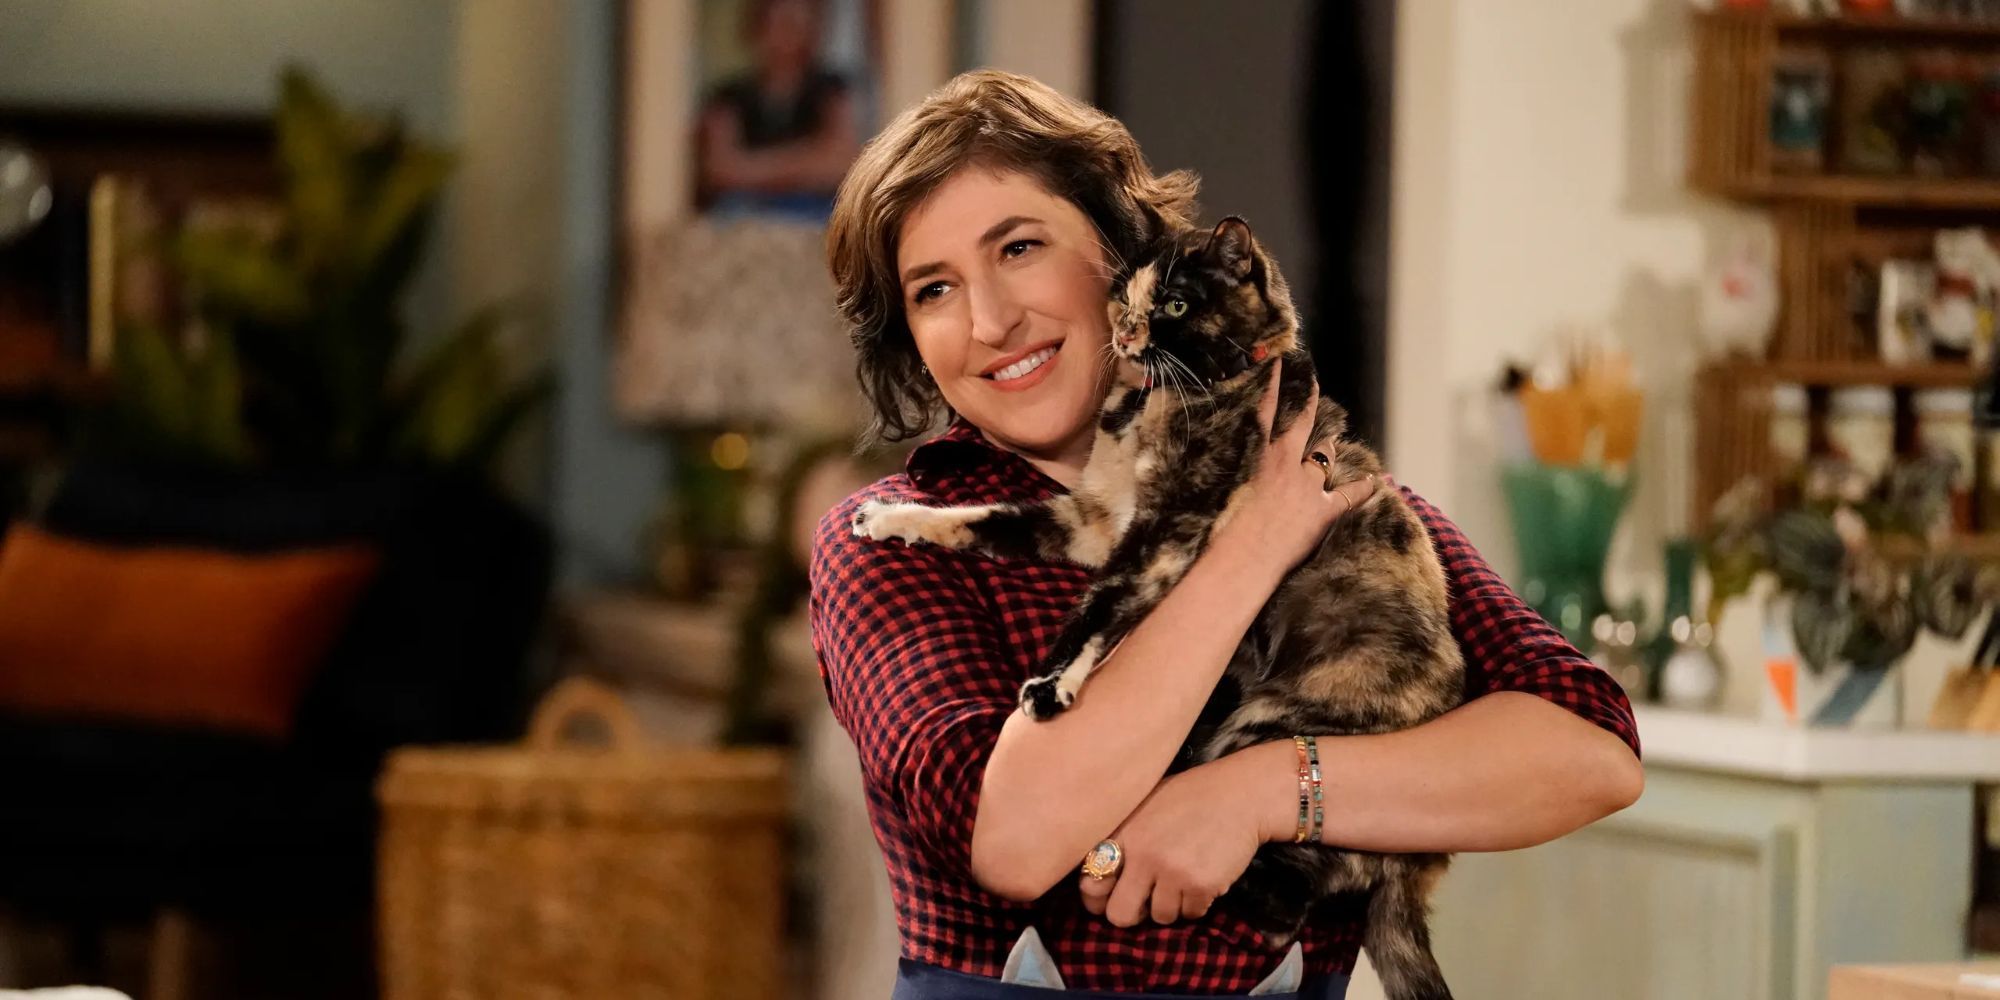 a woman holding a cat